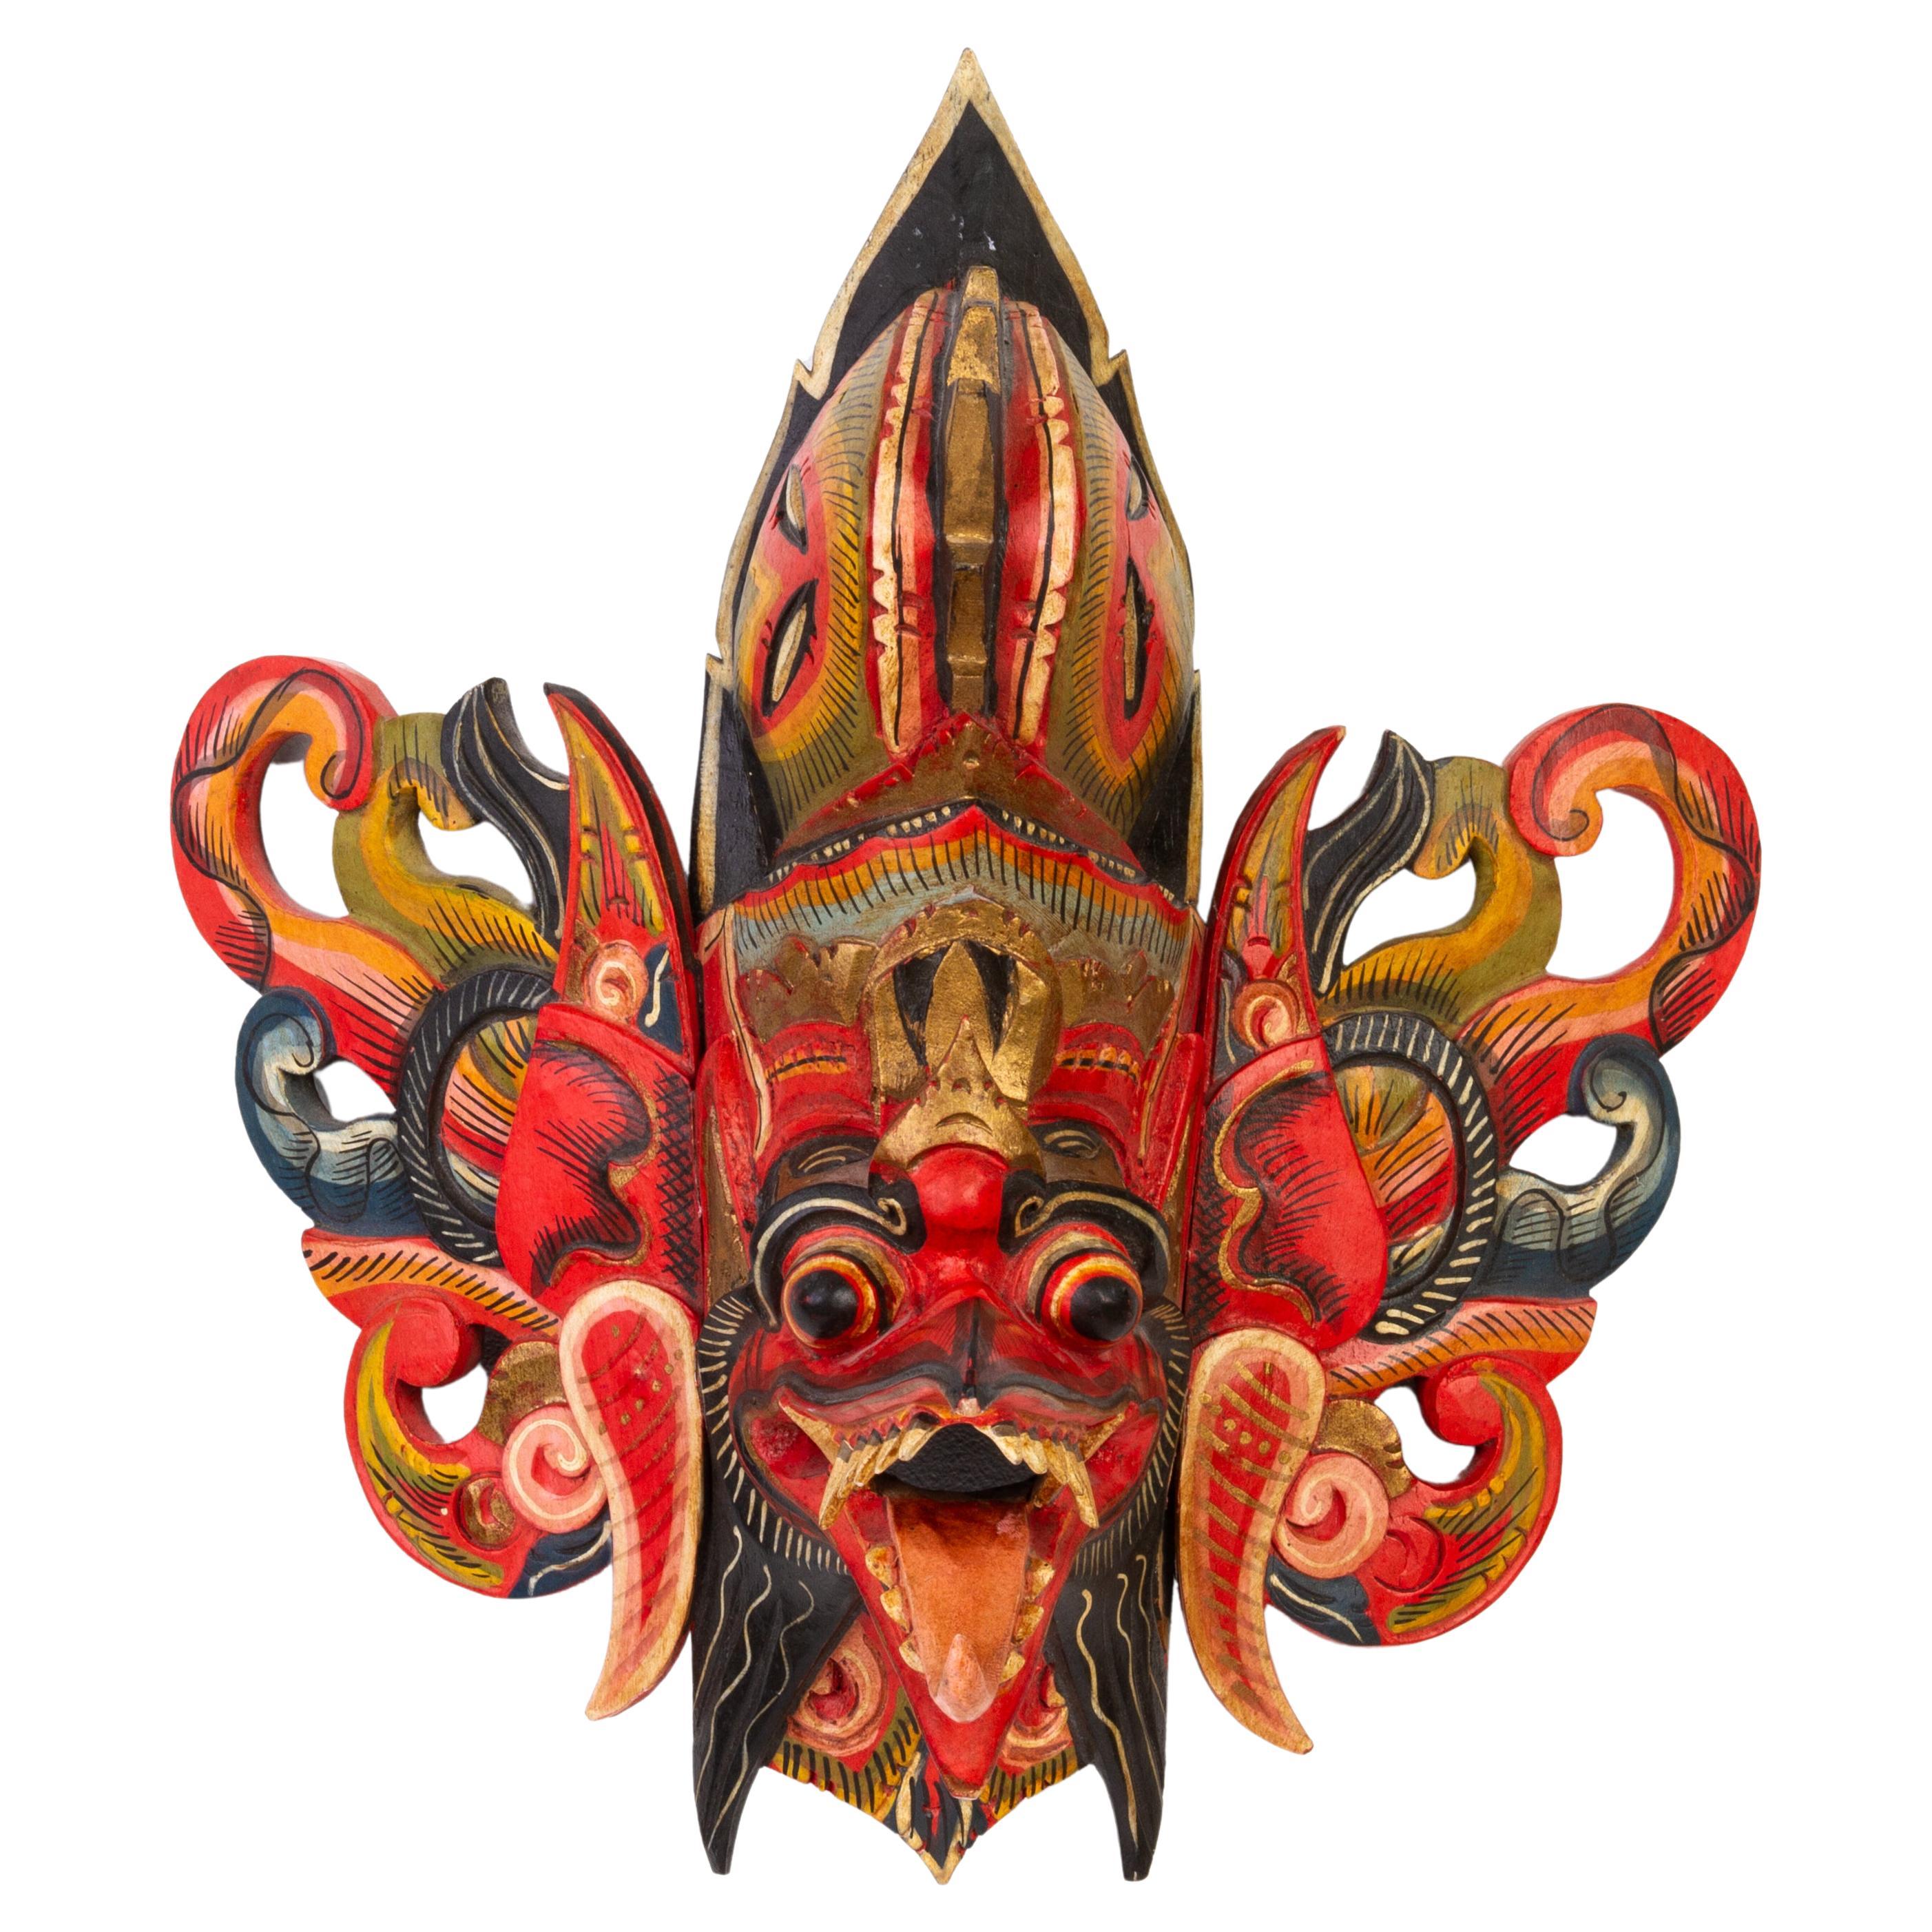 Indonesian Balinese Polychrome Carved Wood Barong Mask